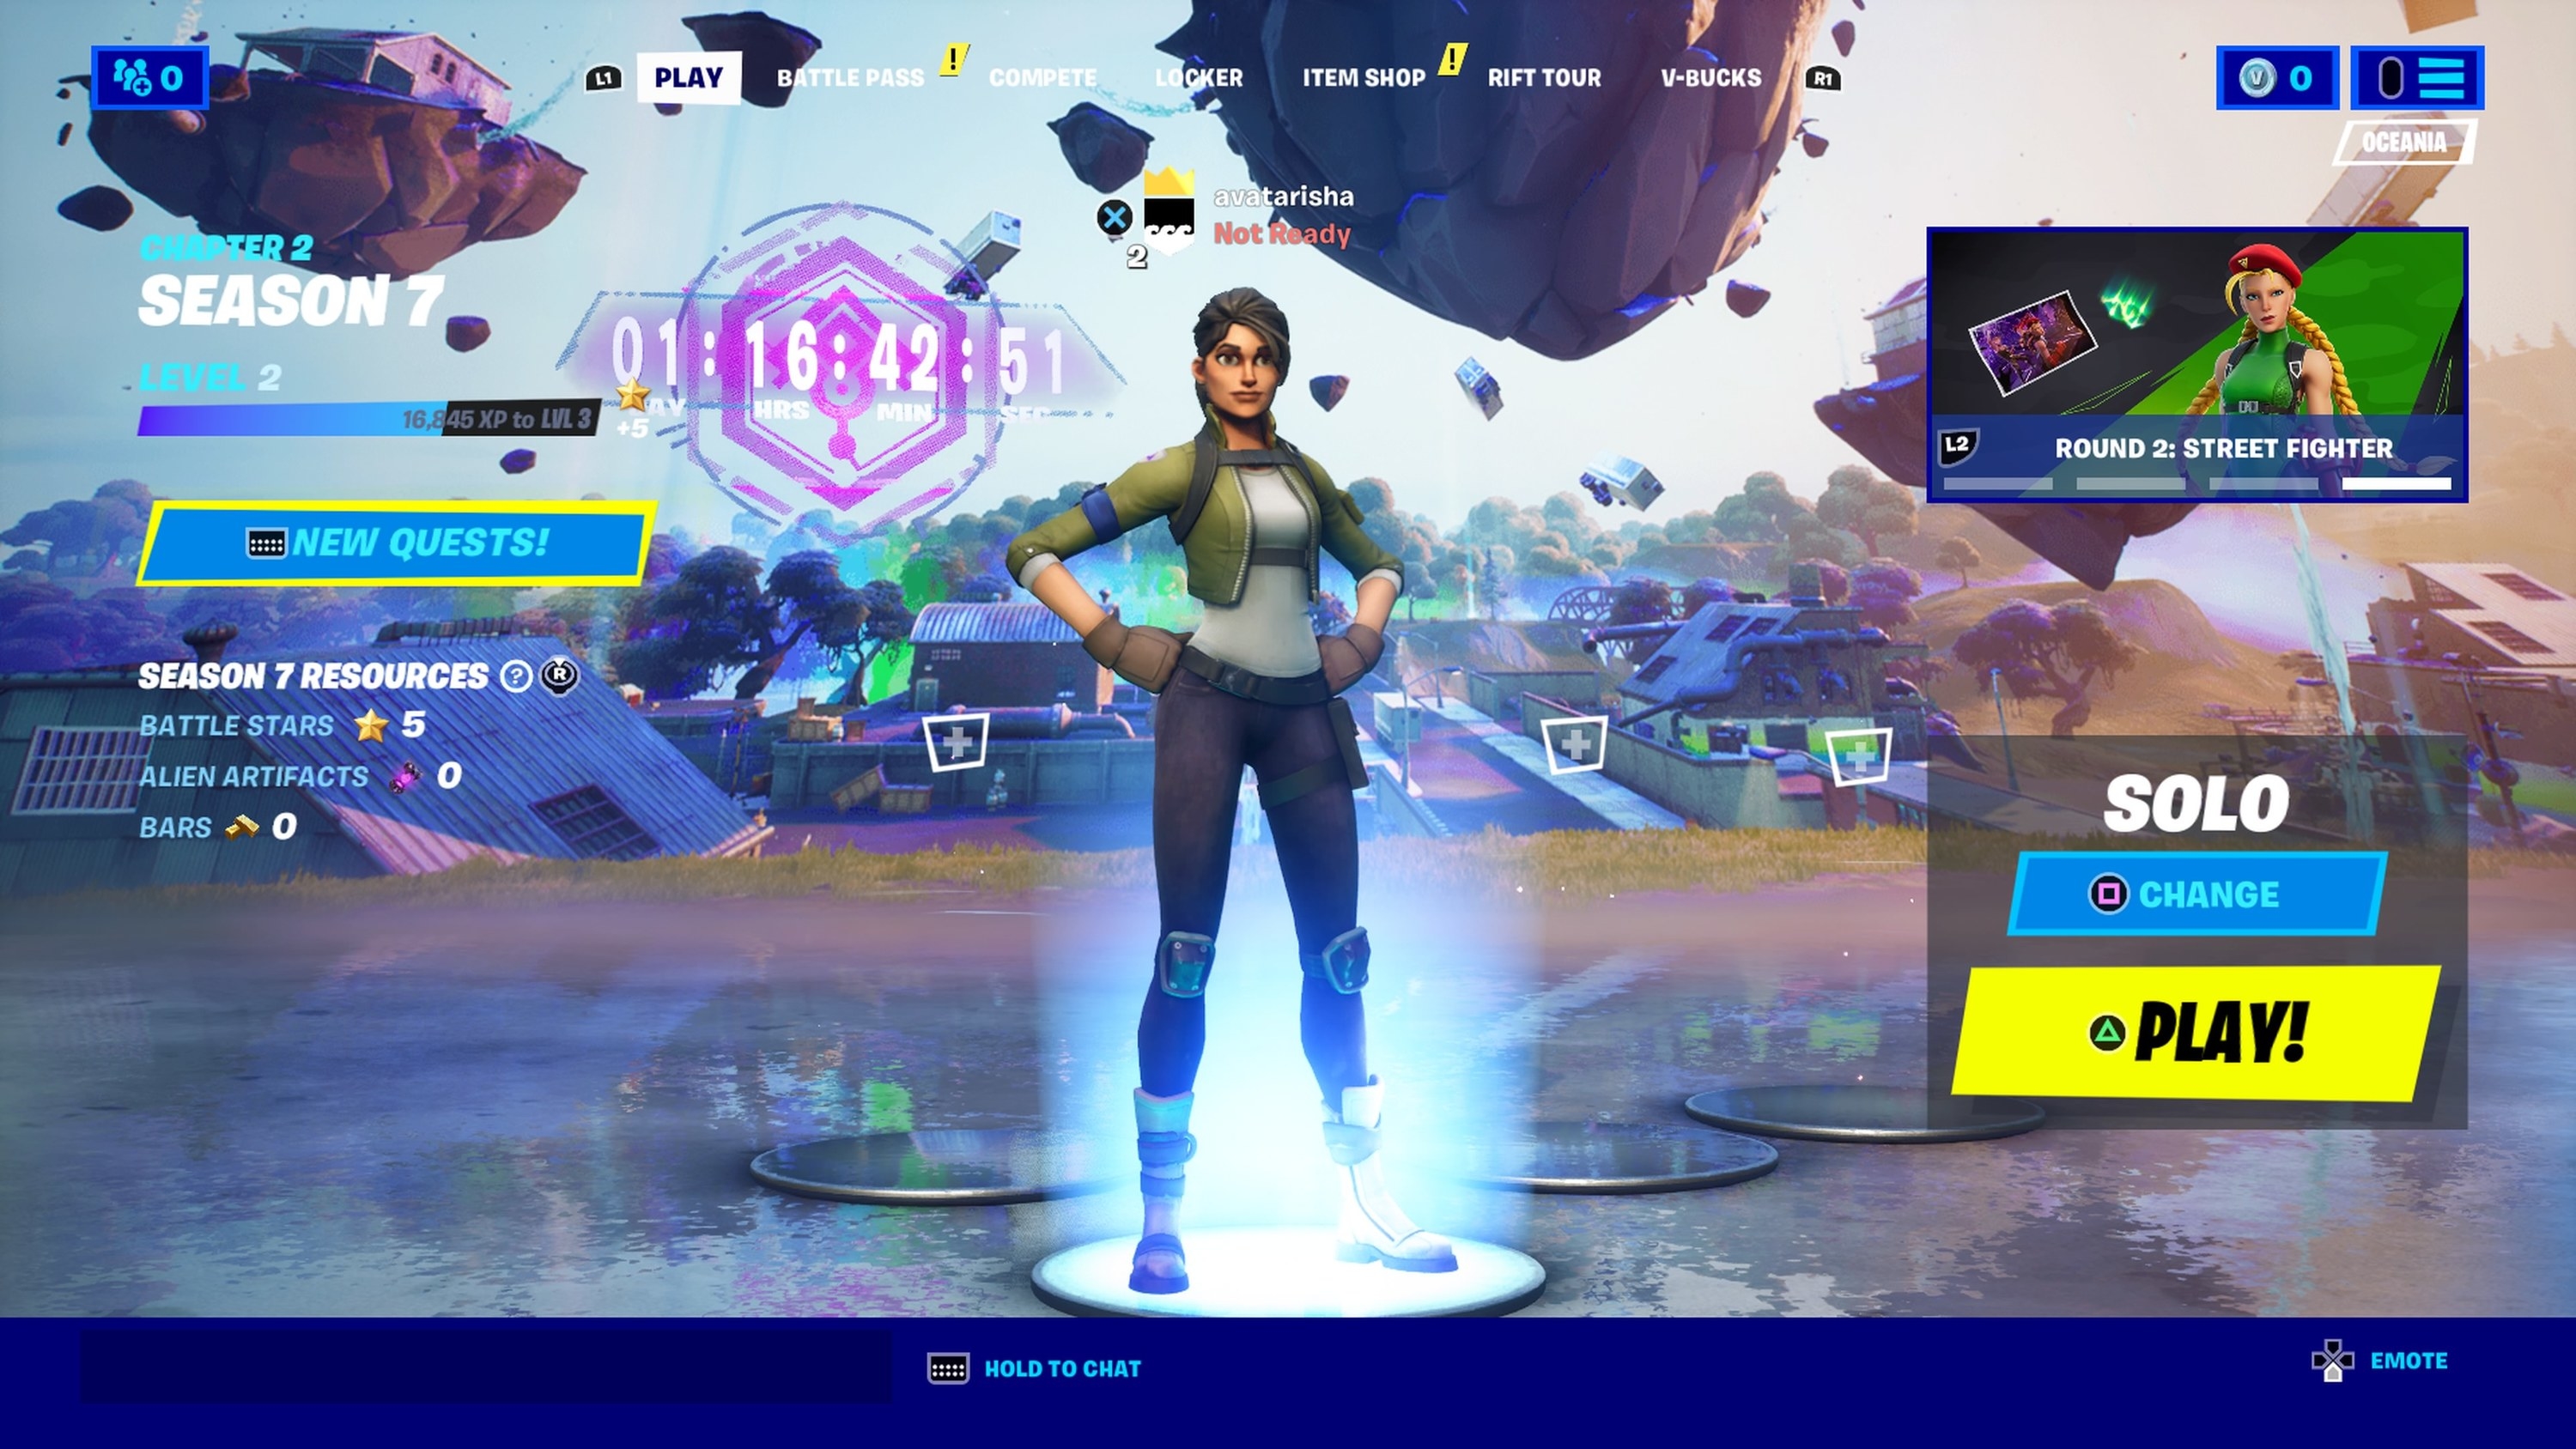 The Fortnite character screen seen before a player heads into a game; you can see the Fortnite character and their stats